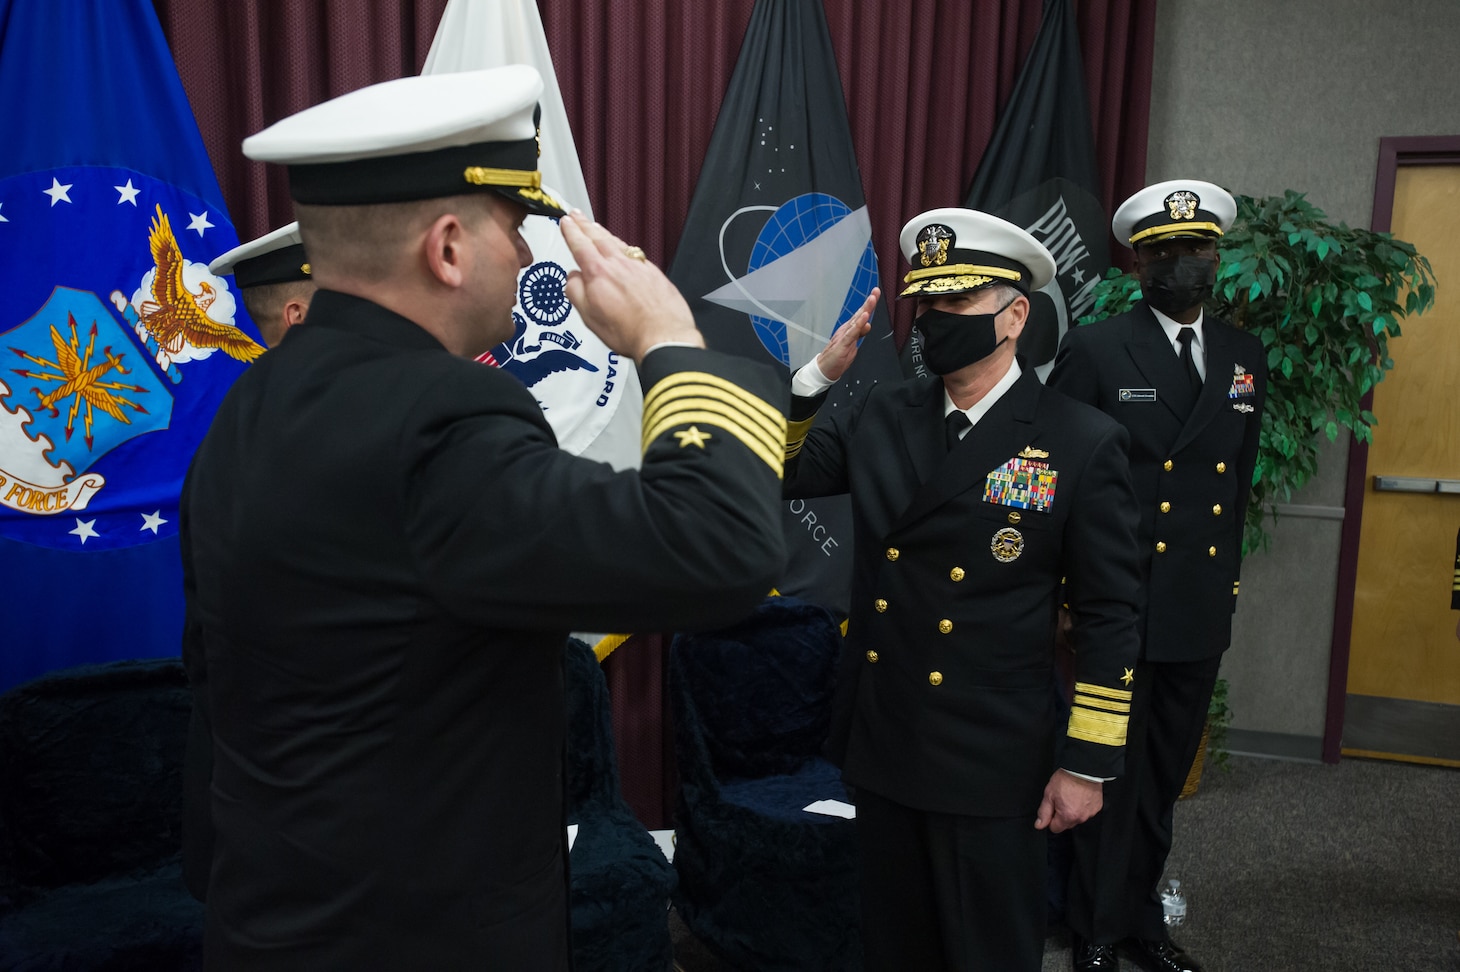 220114-N-SI161-081 DAHLGREN, Va. (Jan. 14, 2022) Capt. John D. Stoner, Jr. is relieved by Capt. George A. Kessler, Jr. as commodore, Surface Combat Systems Training Command (SCSTC), in a Change of Command ceremony aboard Naval Support Facility Dahlgren, Virginia, Jan. 14. Vice Adm. Roy Kitchener, commander, Naval Surface Forces, serves as the presiding officer and guest speaker for the event. (U.S. Navy photo by Michael Bova)